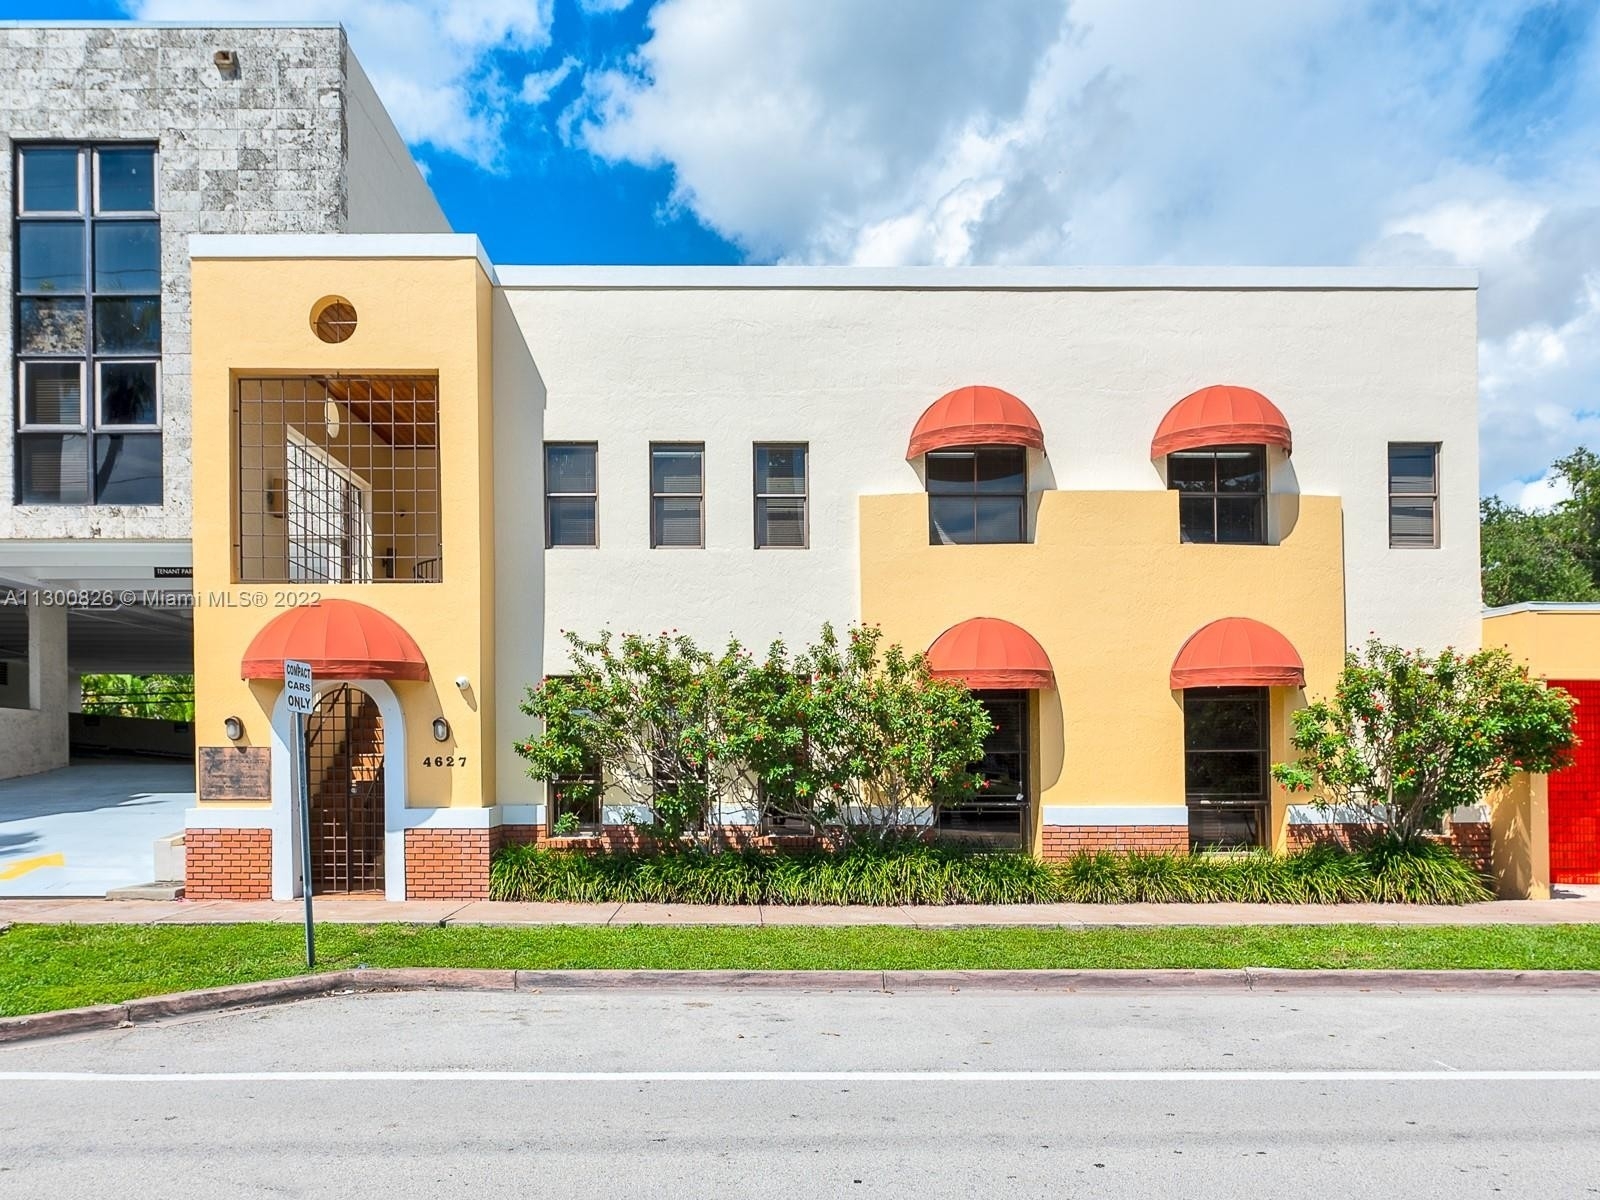 Commercial / Office for Sale at Riviera, Coral Gables, FL 33146